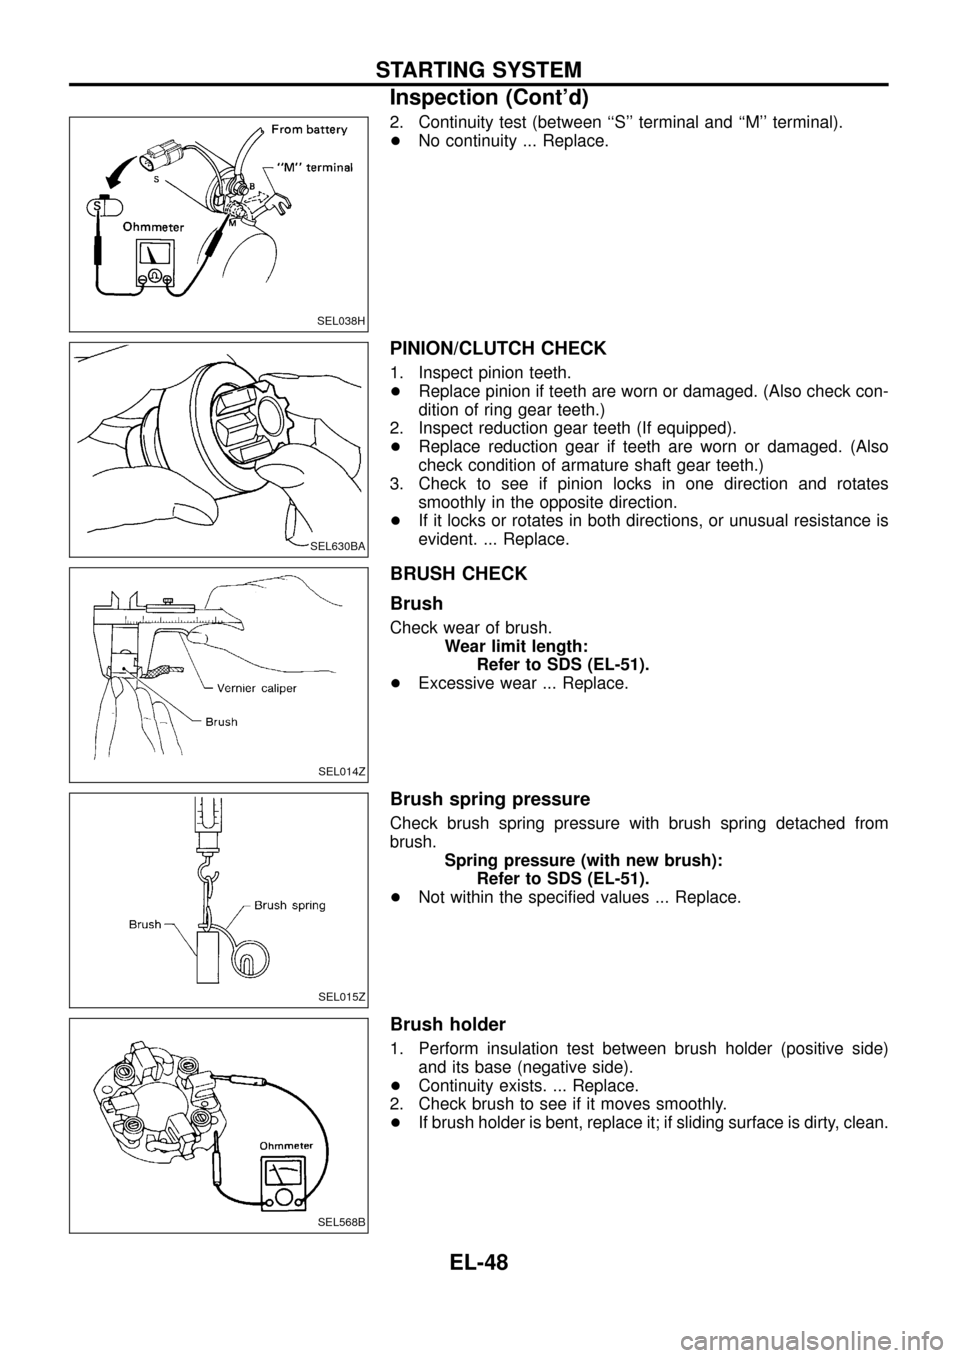 NISSAN PATROL 1998 Y61 / 5.G Electrical System Repair Manual 2. Continuity test (between ``S terminal and ``M terminal).
+No continuity ... Replace.
PINION/CLUTCH CHECK
1. Inspect pinion teeth.
+Replace pinion if teeth are worn or damaged. (Also check con-
